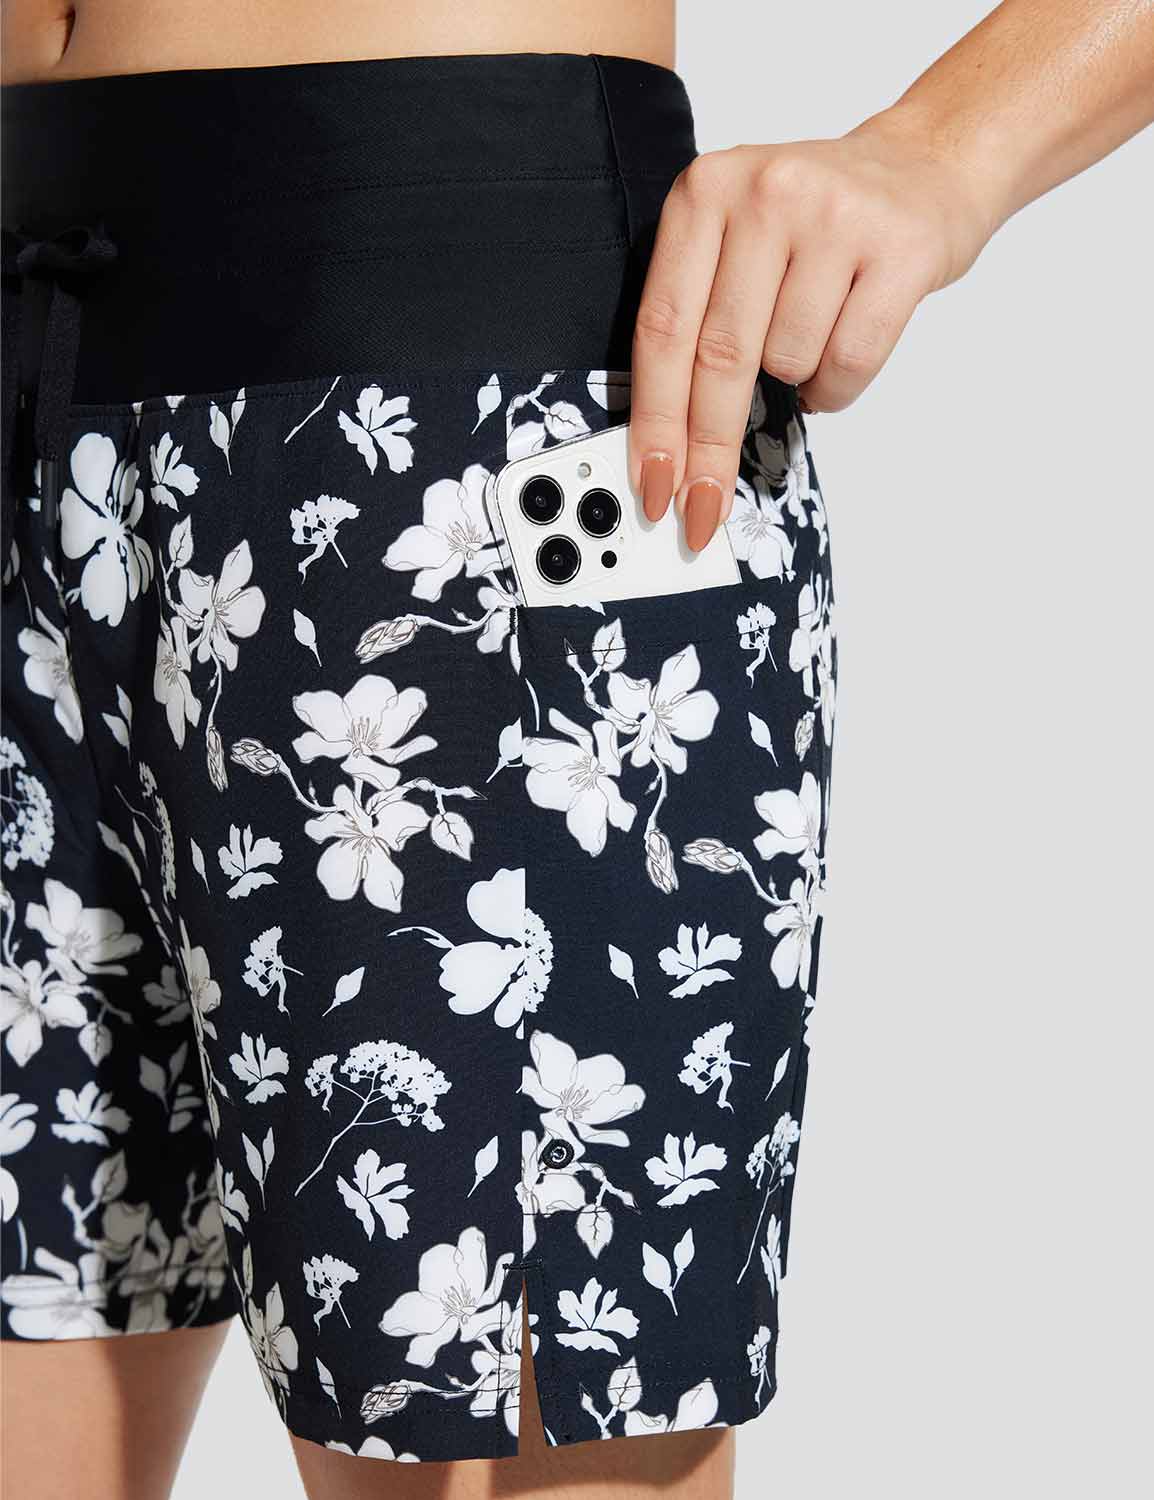 Baleaf Women's Wide Waistband Printed Quick-dry Swim Shorts Black White Flowers with Side Pockets